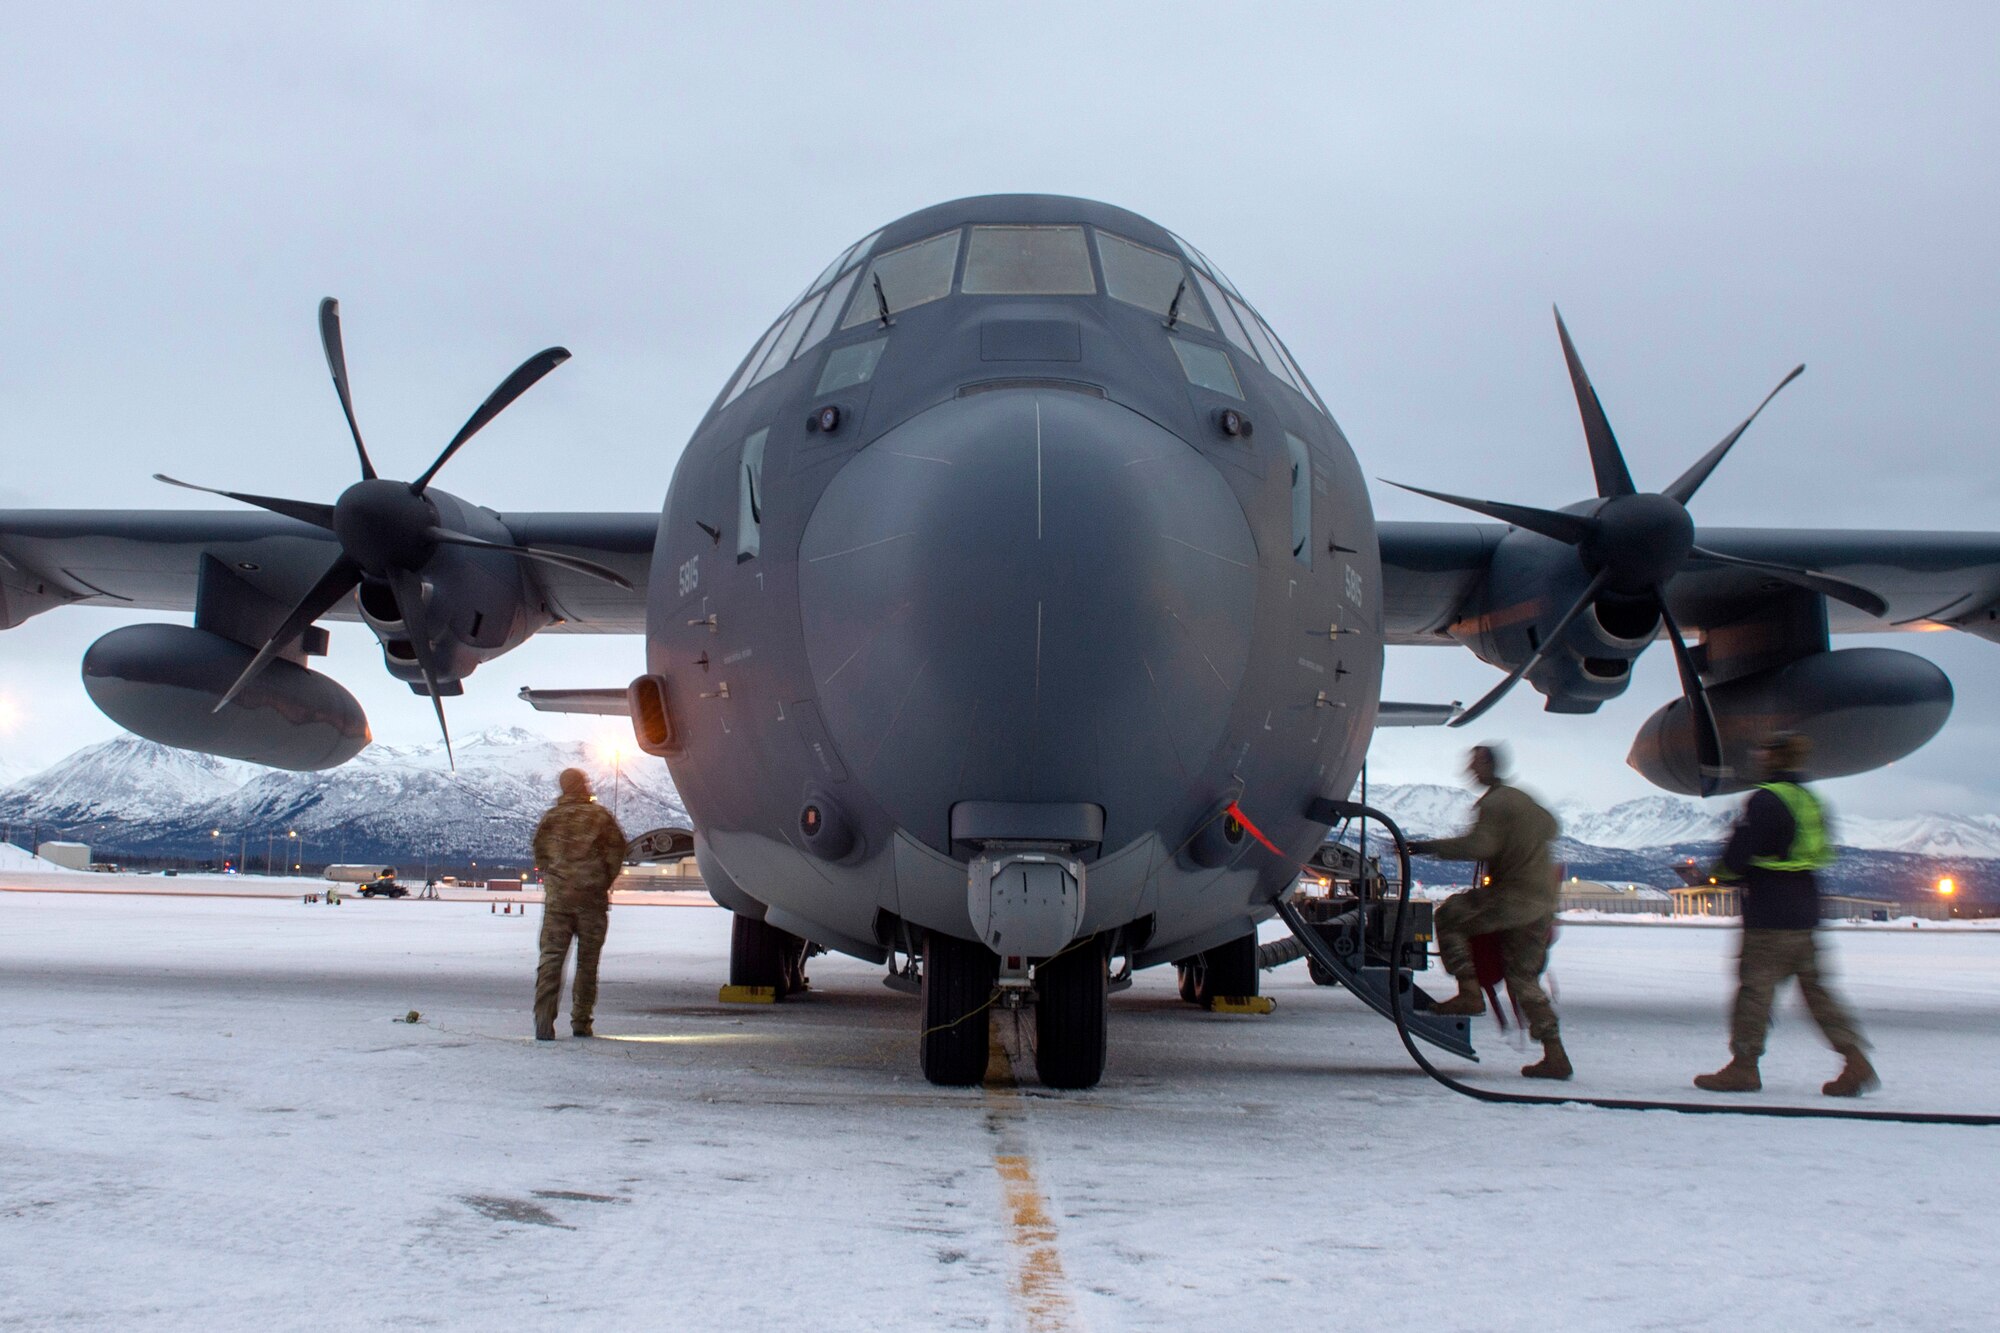 U.S. Airmen assigned to the 176th Maintenance Squadron, Alaska Air National Guard, check a HC-130J Combat King II prior to takeoff at Joint Base Elmendorf-Richardson, Alaska, Jan. 21, 2021, during Operation Noble Defender. Operation Noble Defender is a North American Aerospace Defense Command air-defense operation which allows dynamic training for operational readiness in an arctic environment.